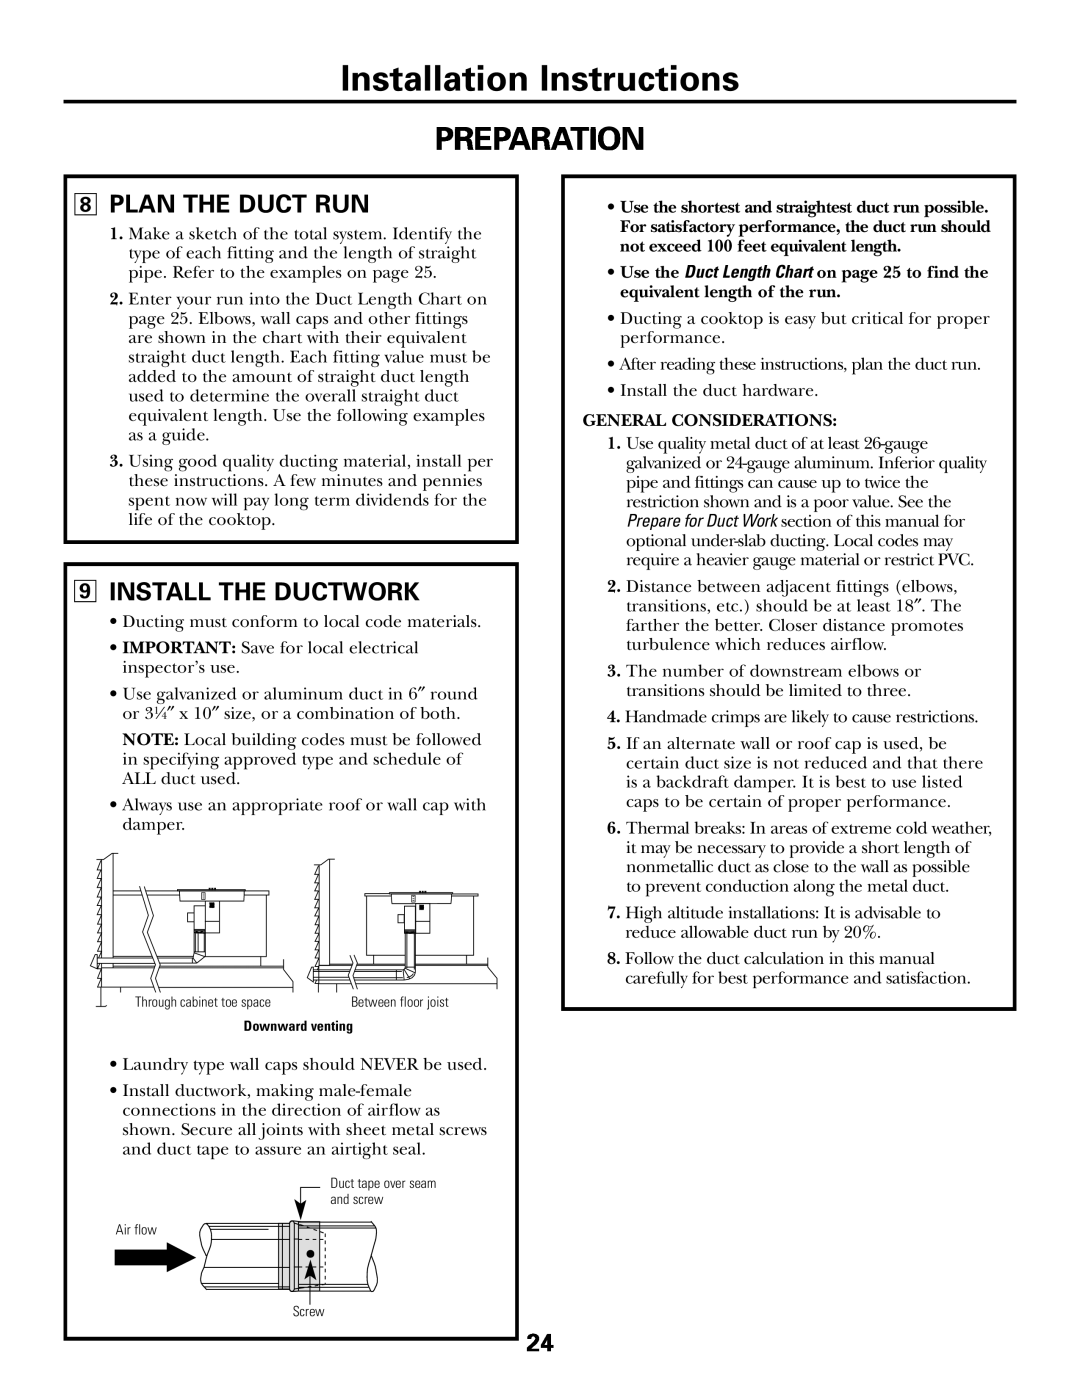 GE JGP985 Installation Instructions, Preparation, 8PLAN THE DUCT RUN, 9INSTALL THE DUCTWORK, General Considerations 